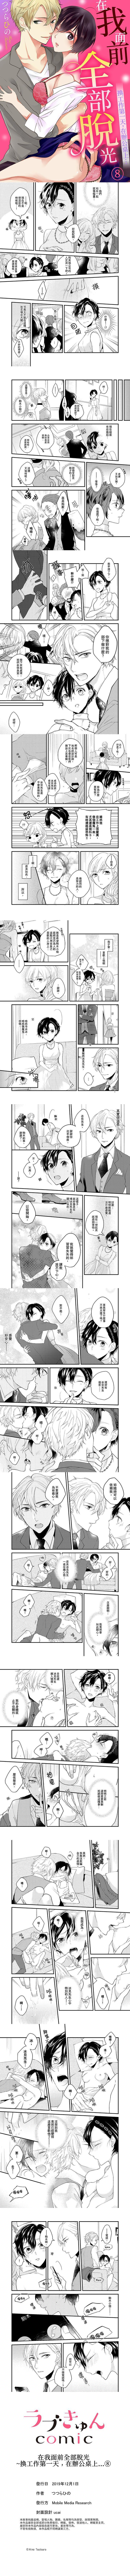 Best Blowjob 在我面前全部脫光 1-12 Squirt - Page 8